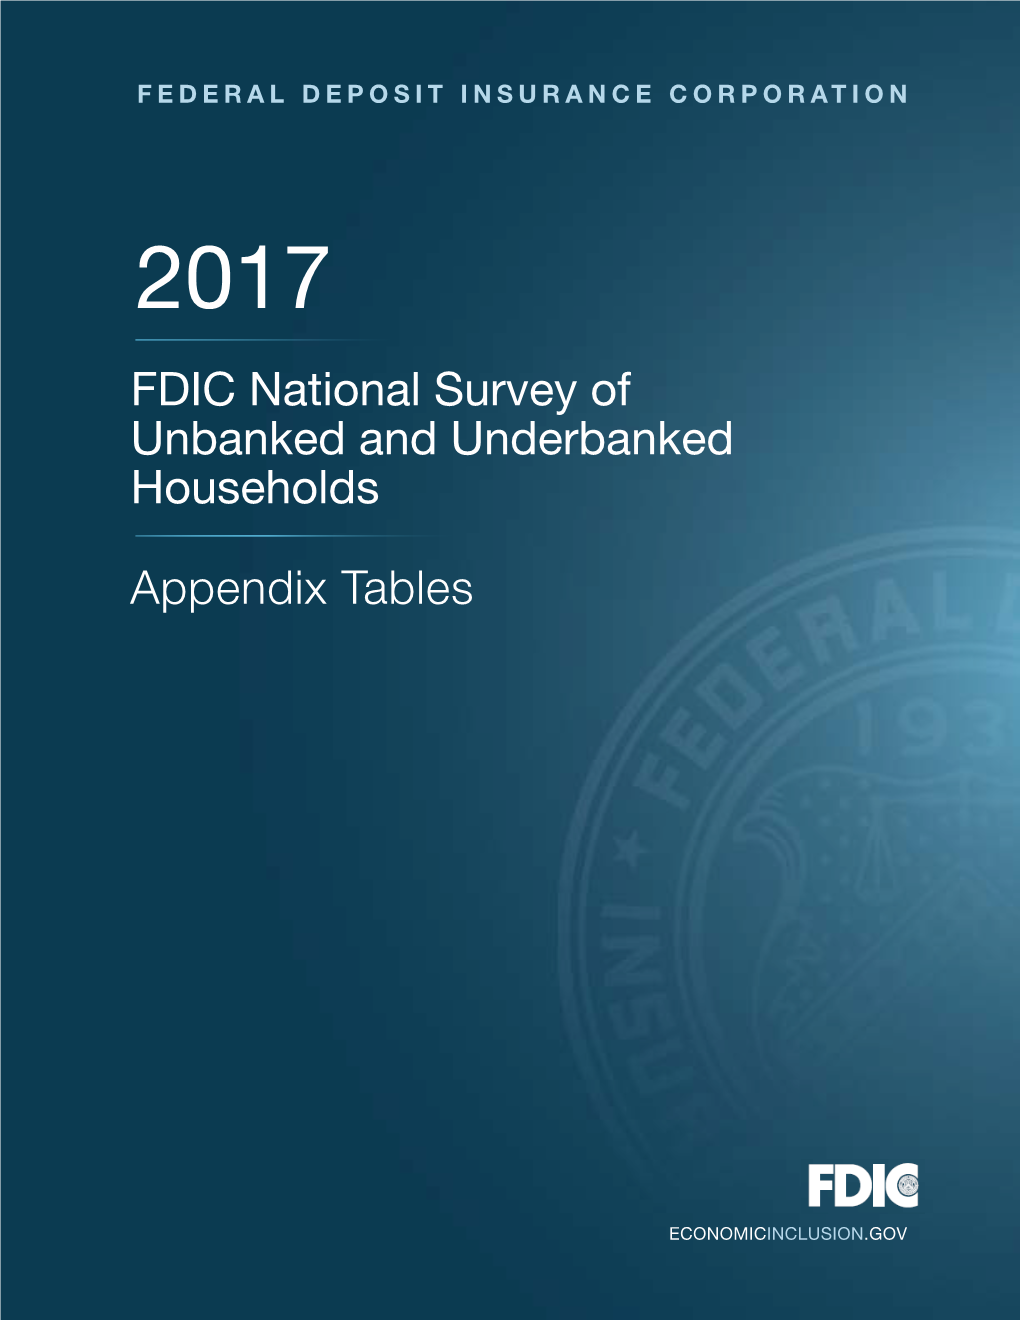 FDIC National Survey of Unbanked and Underbanked Households